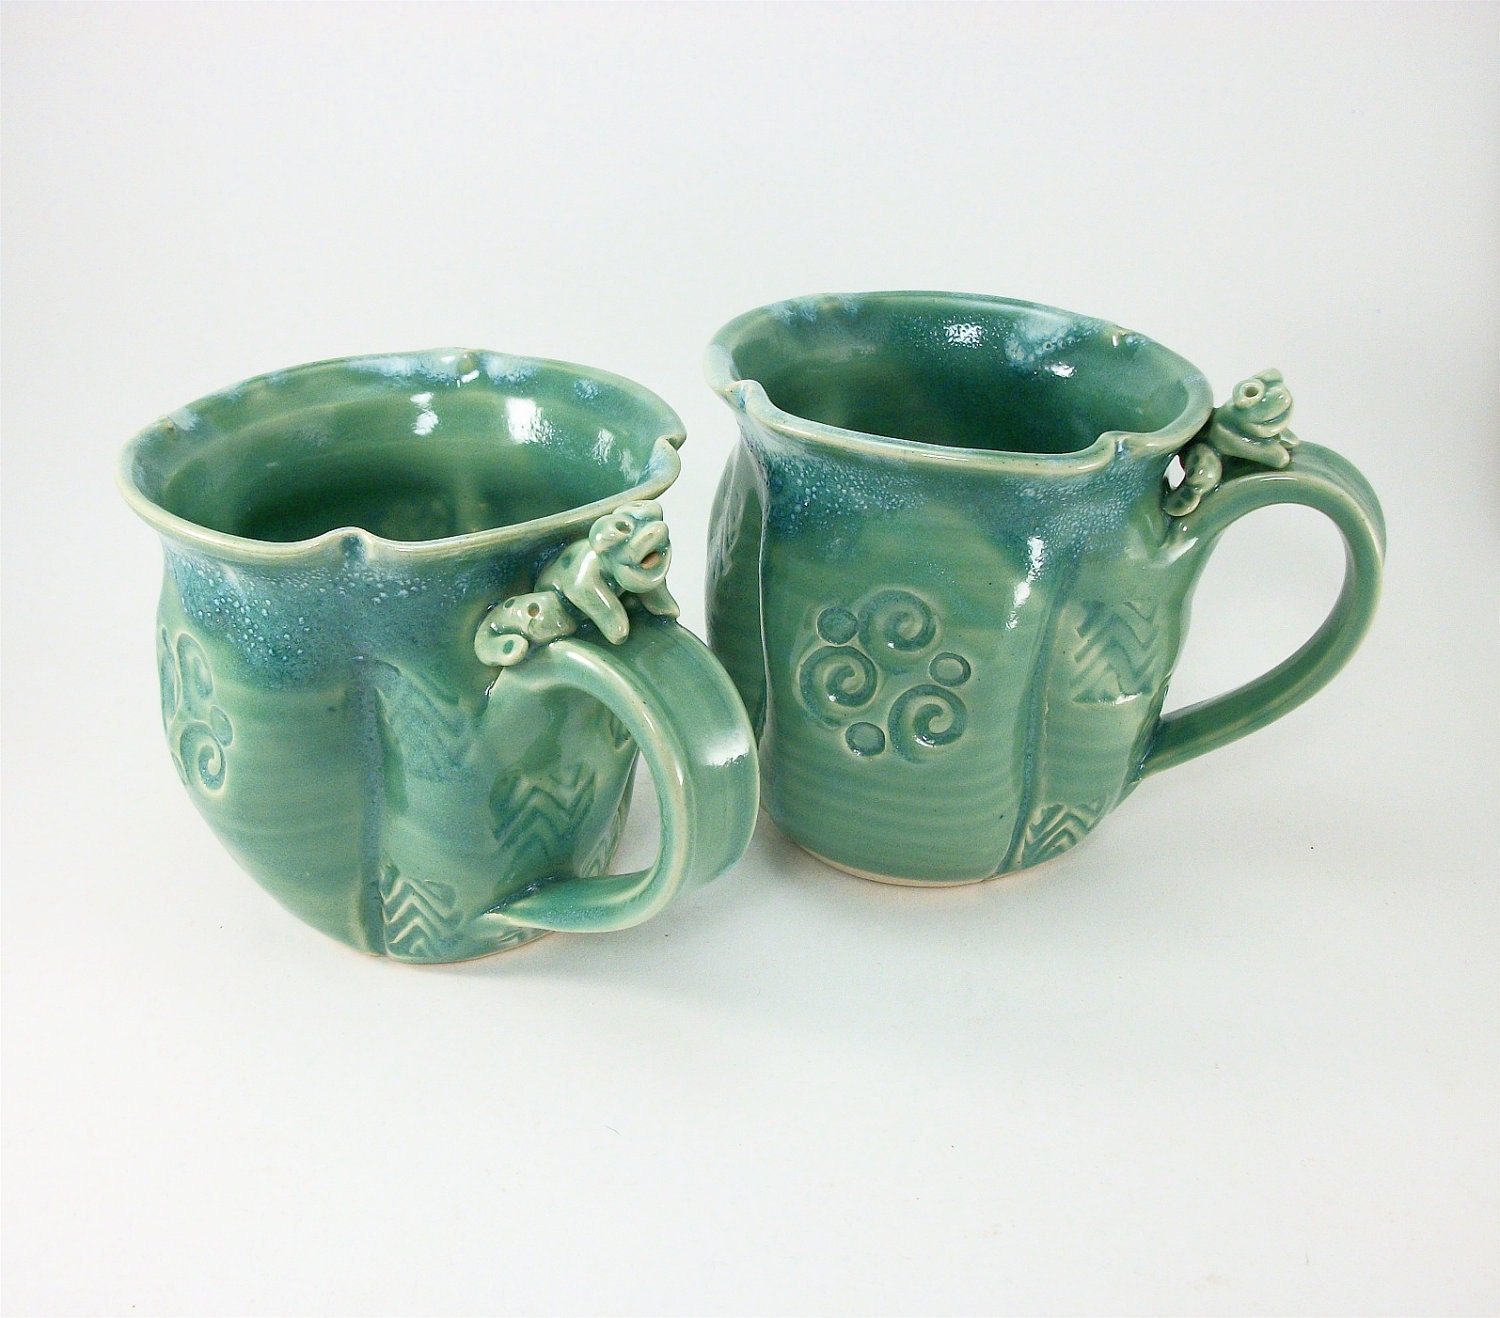 pair of jade colored frog mugs sold together